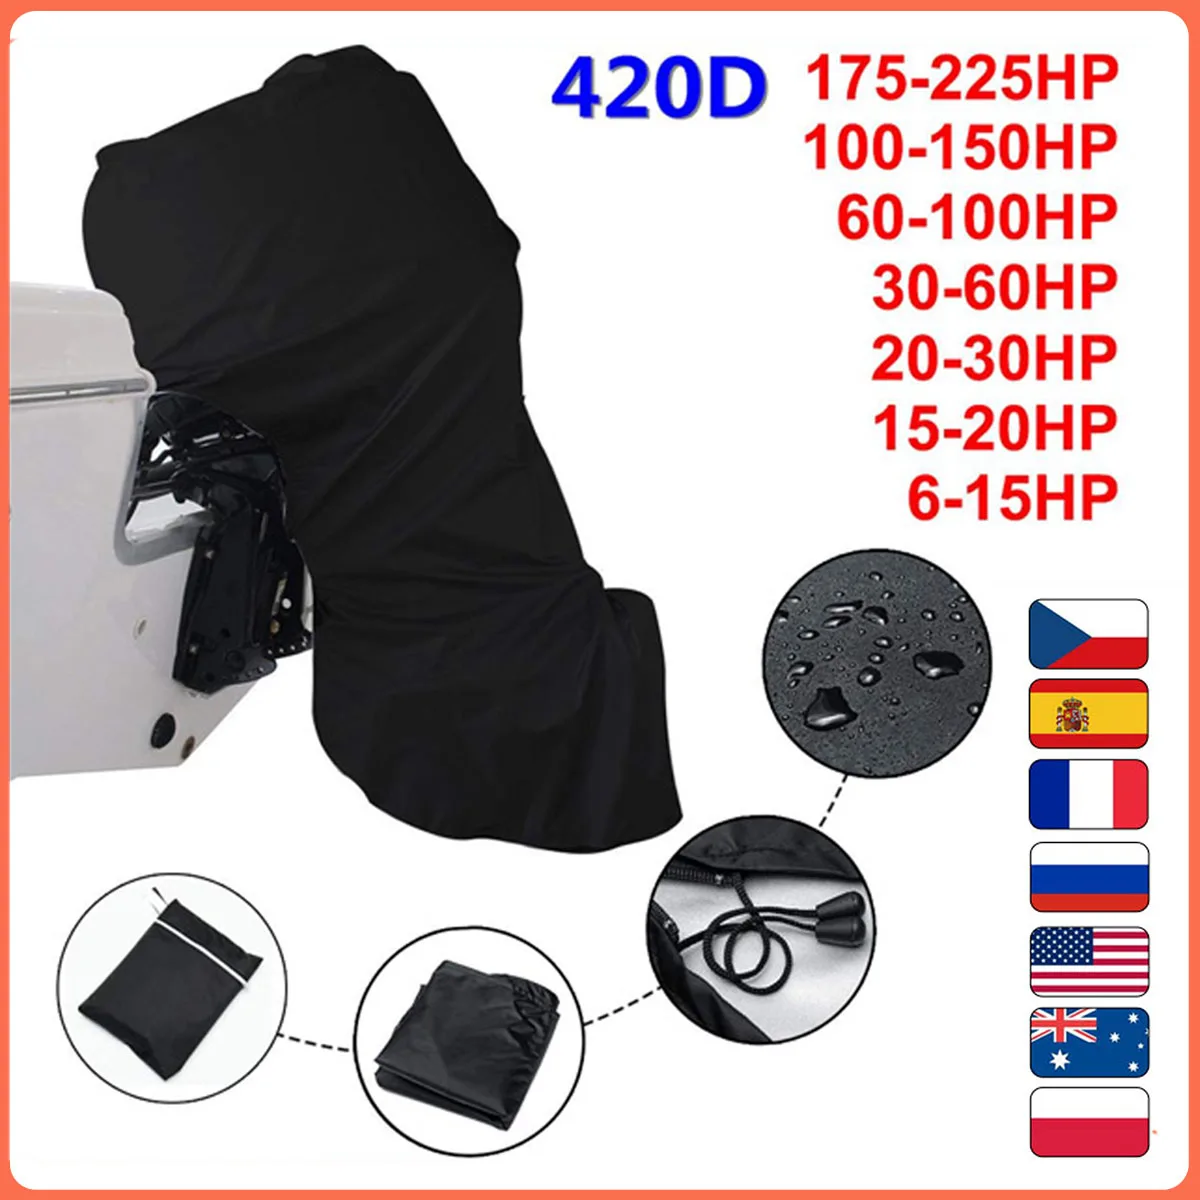 

420D 6-225HP Boat Full Outboard Engine Cover Protection Waterproof Sunshade Dust-proof For 6-225HP Motor Black